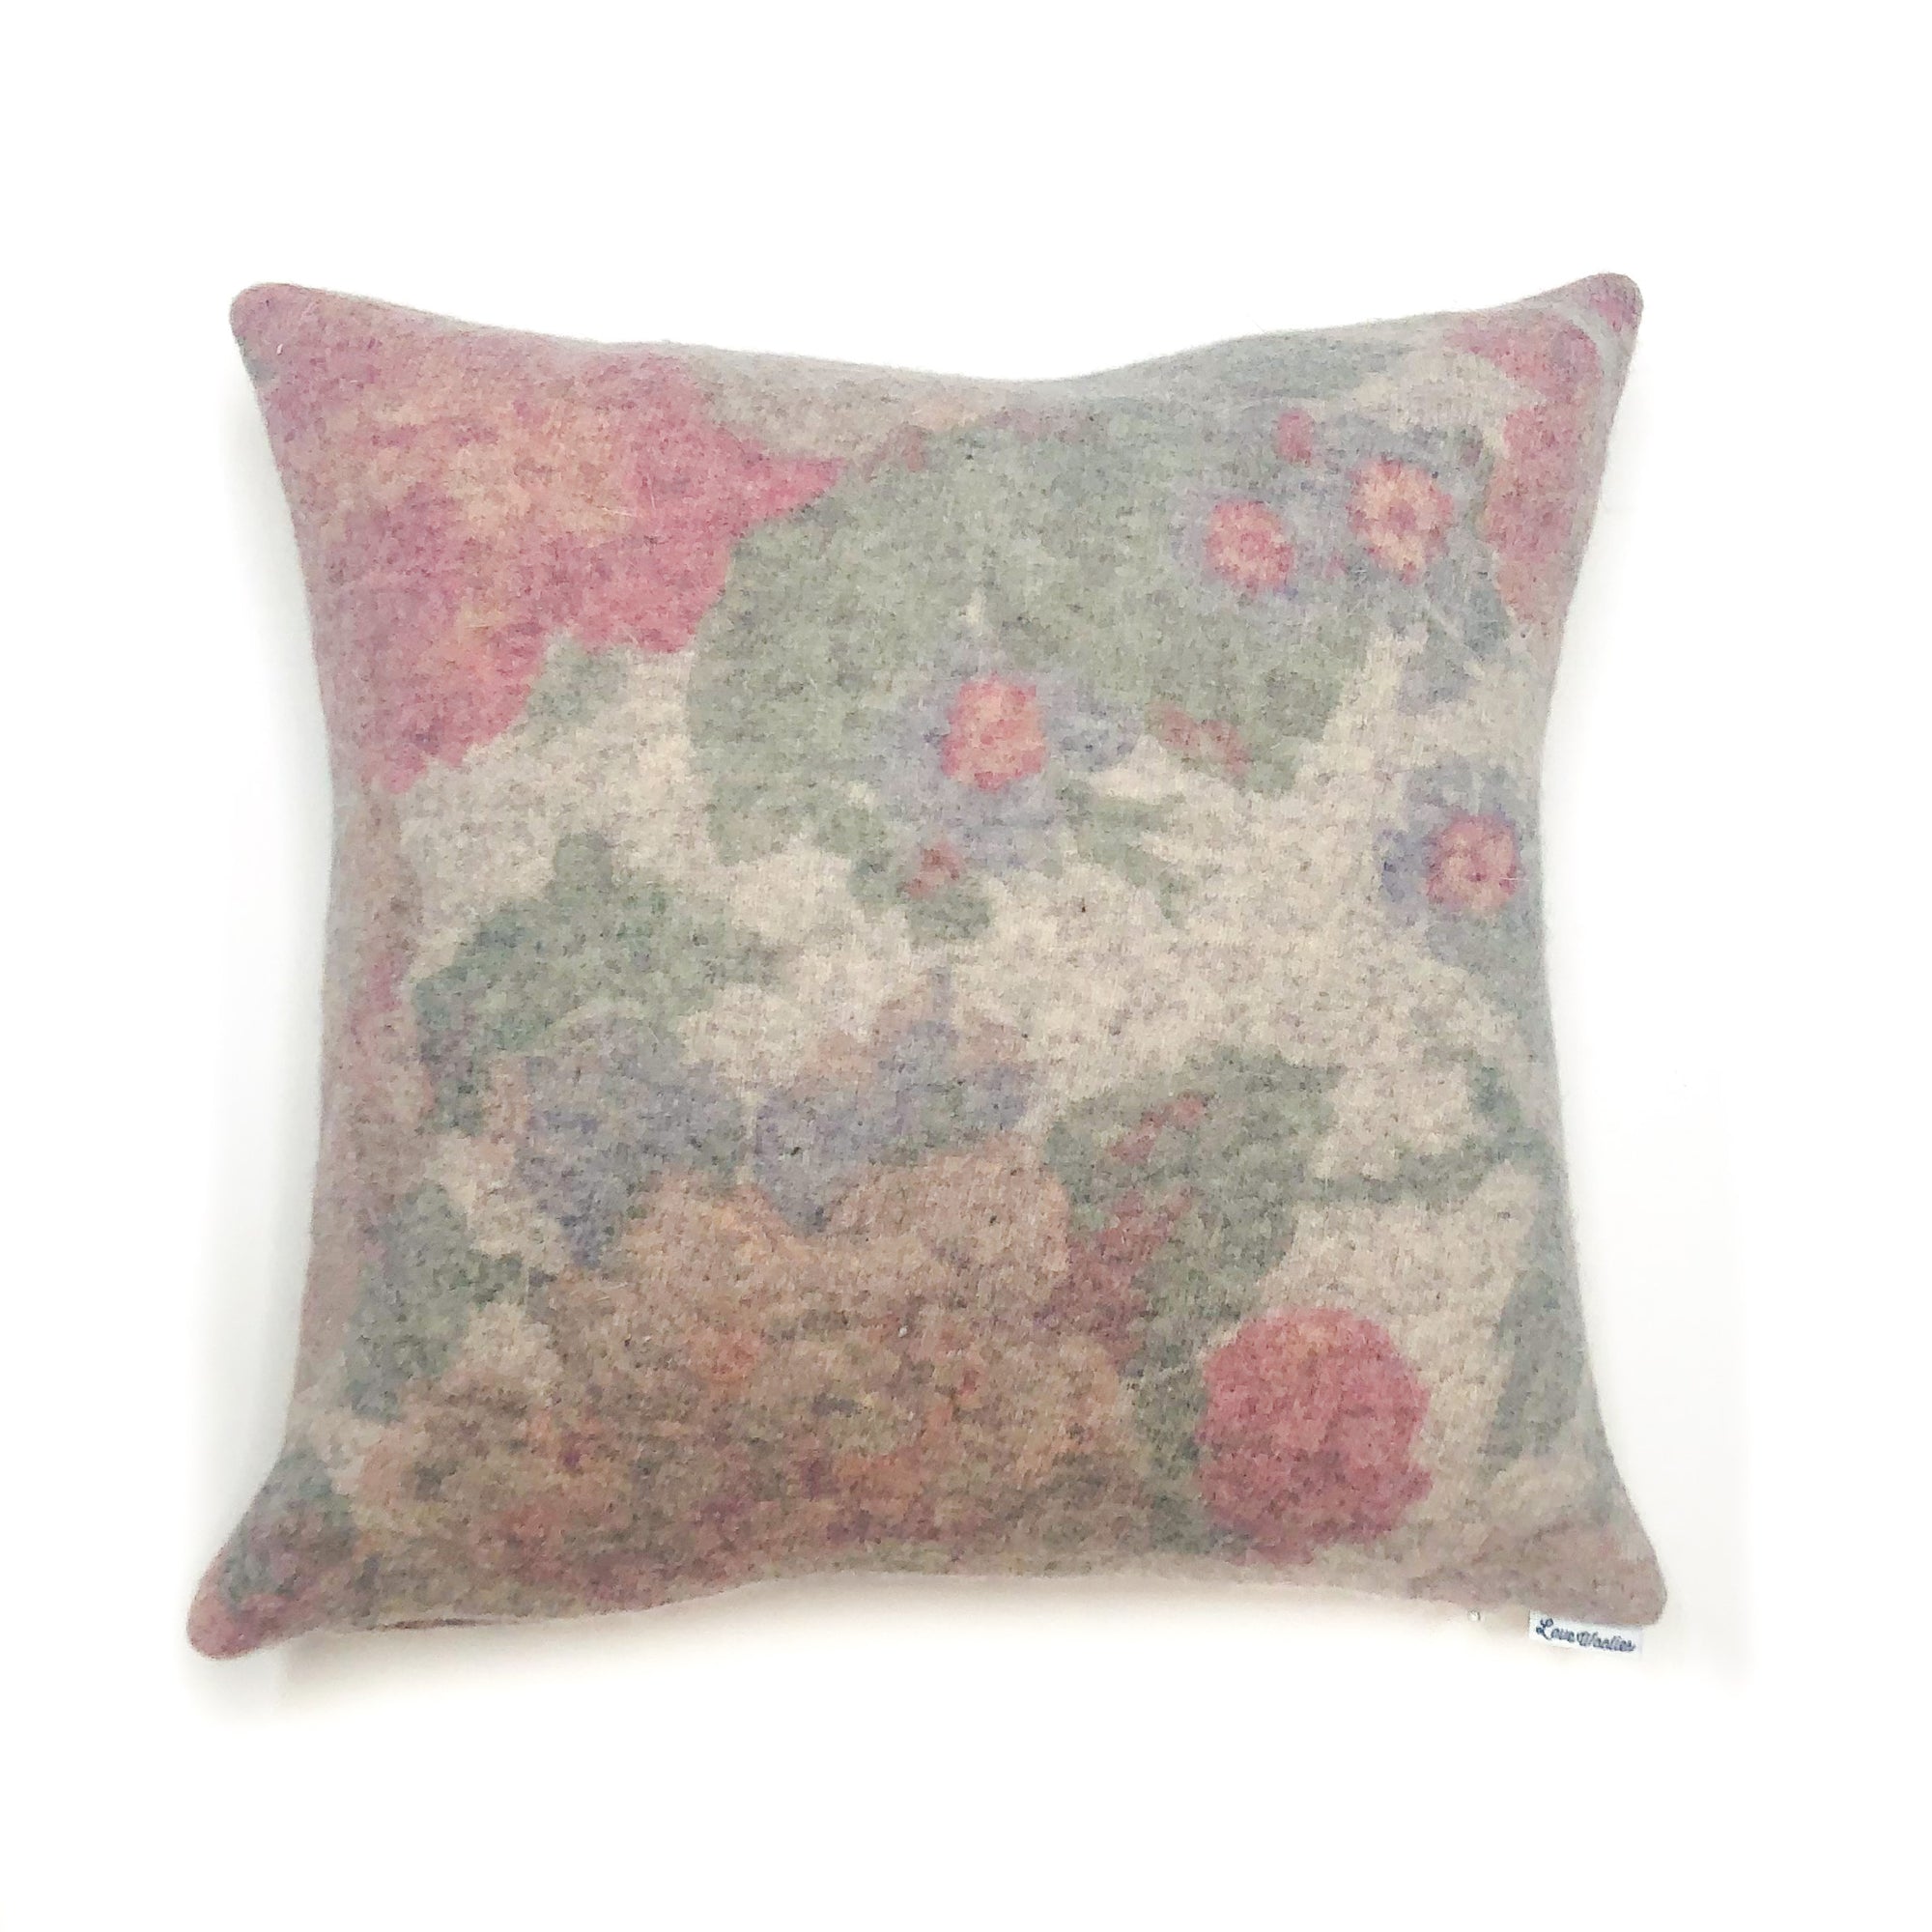 12x12 Floral Pillow cover